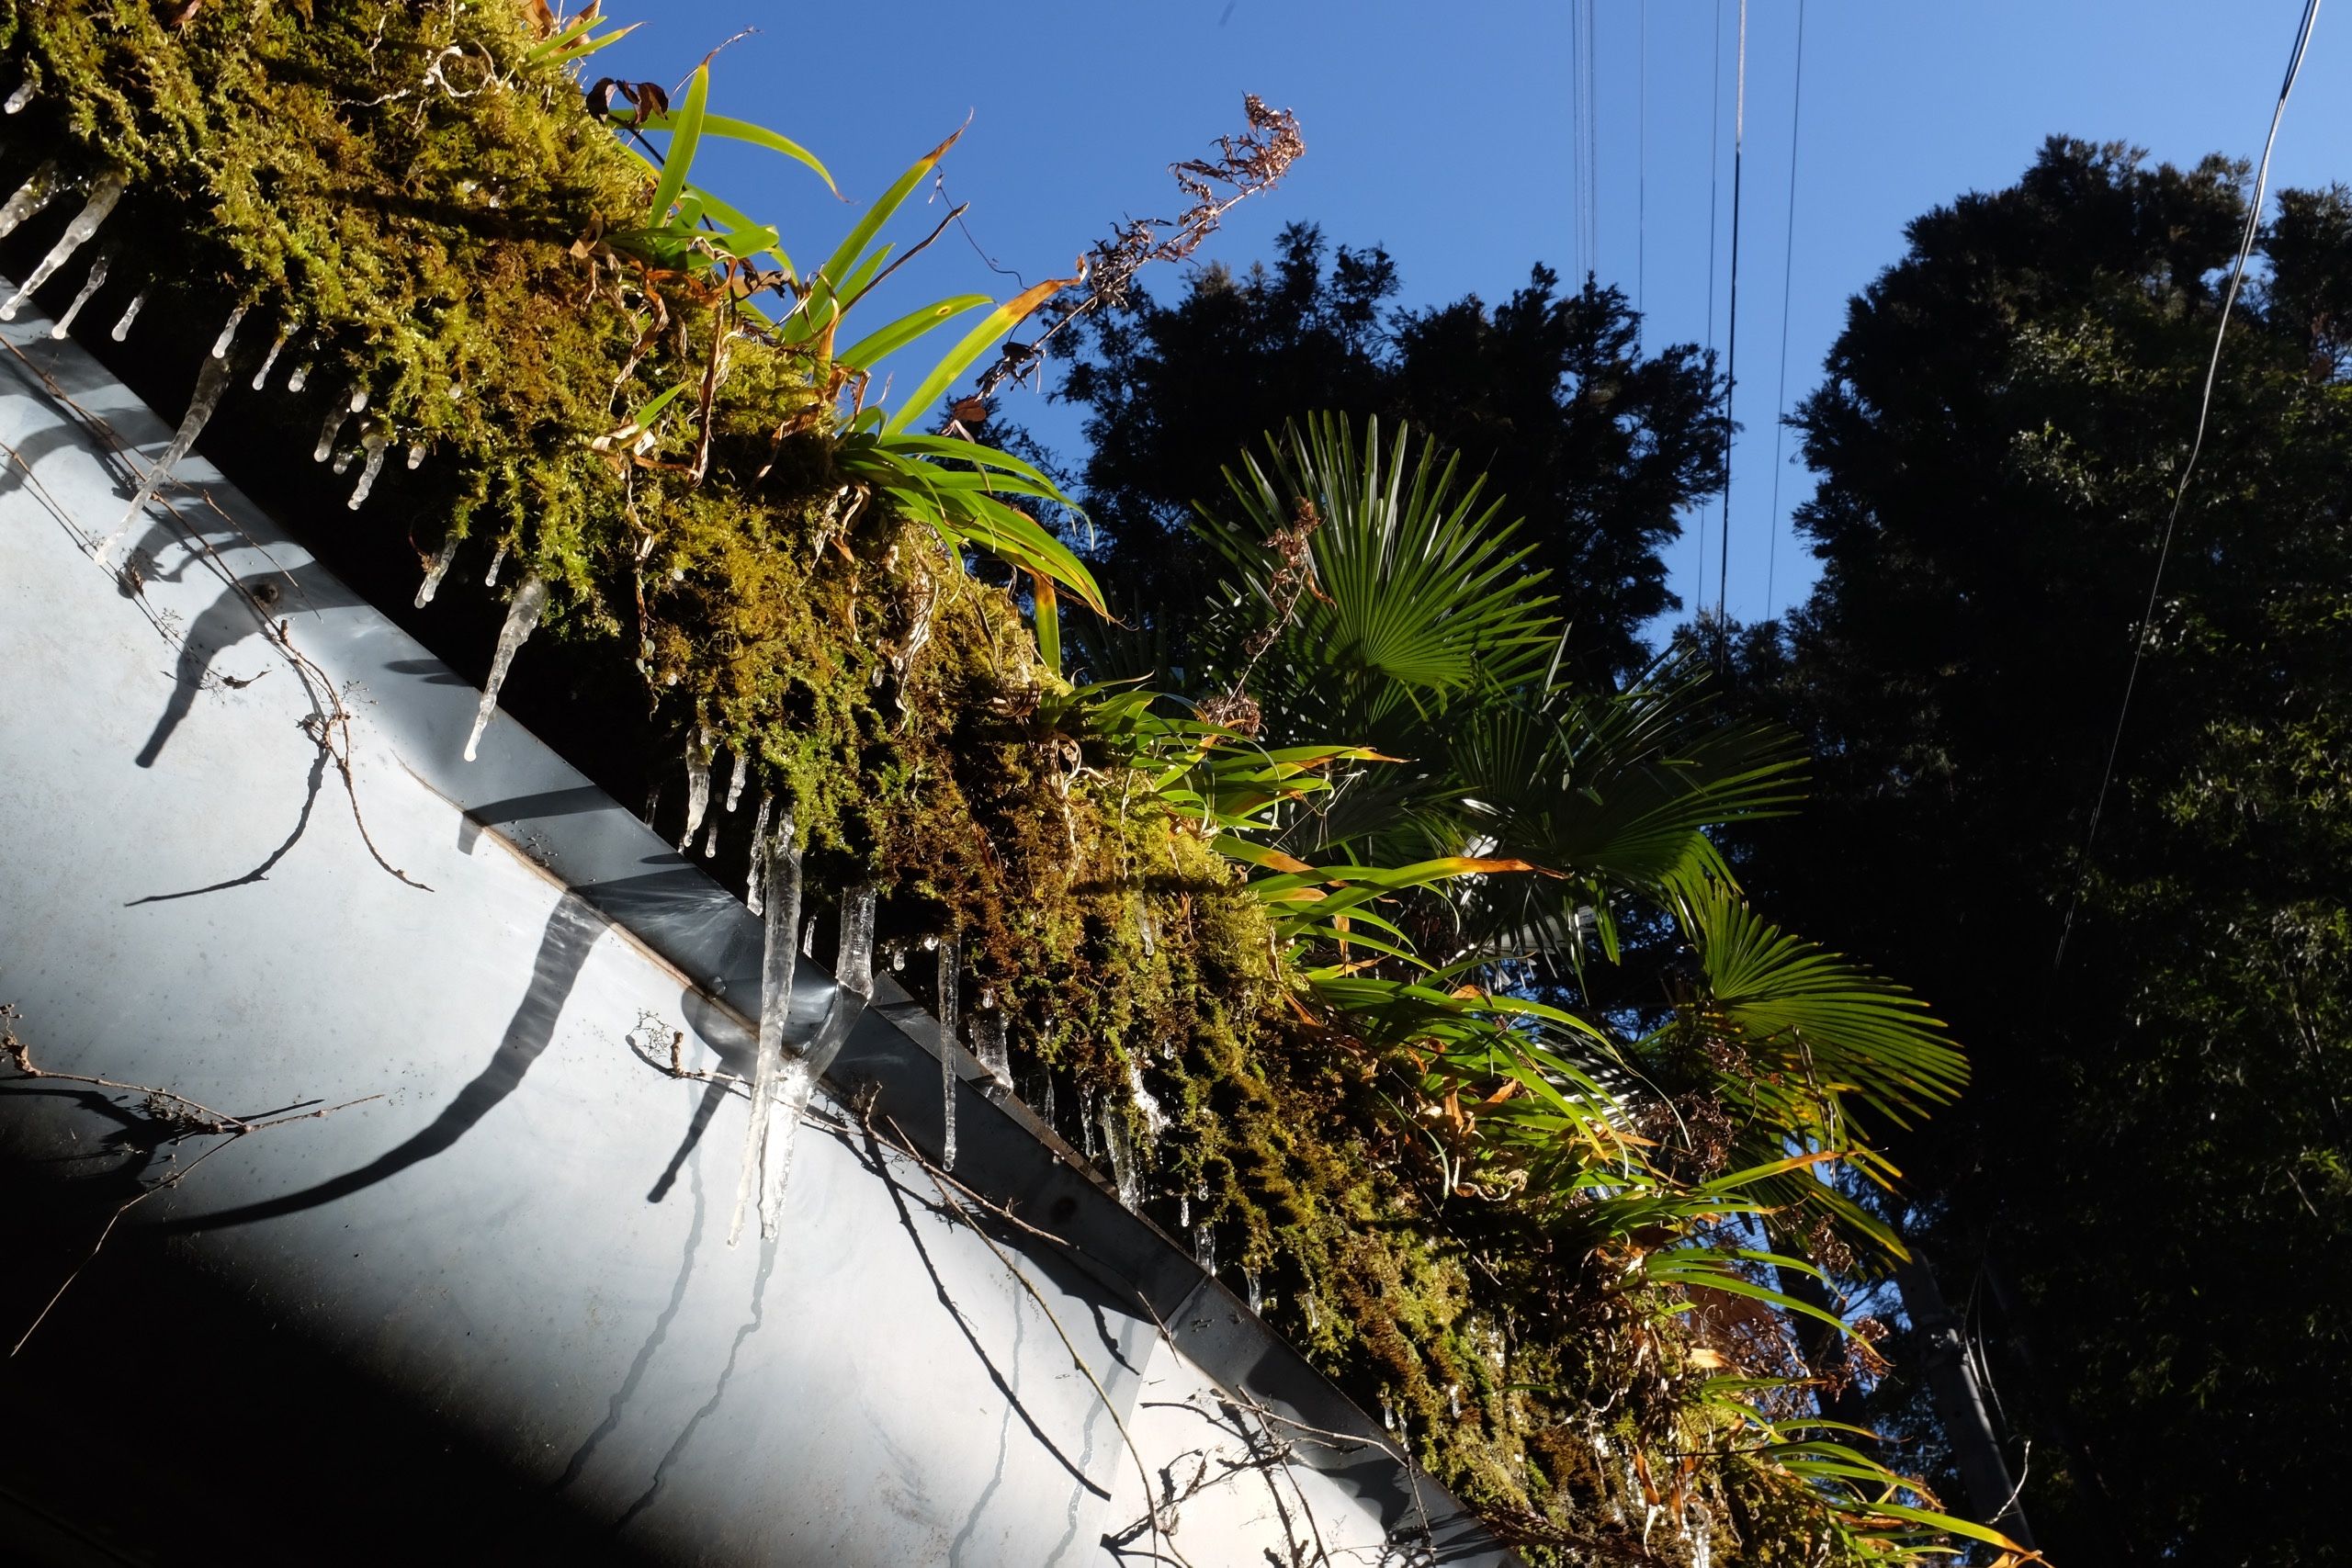 Icicles hanging from a rooftop garden of mosses and palms against a blue sky.